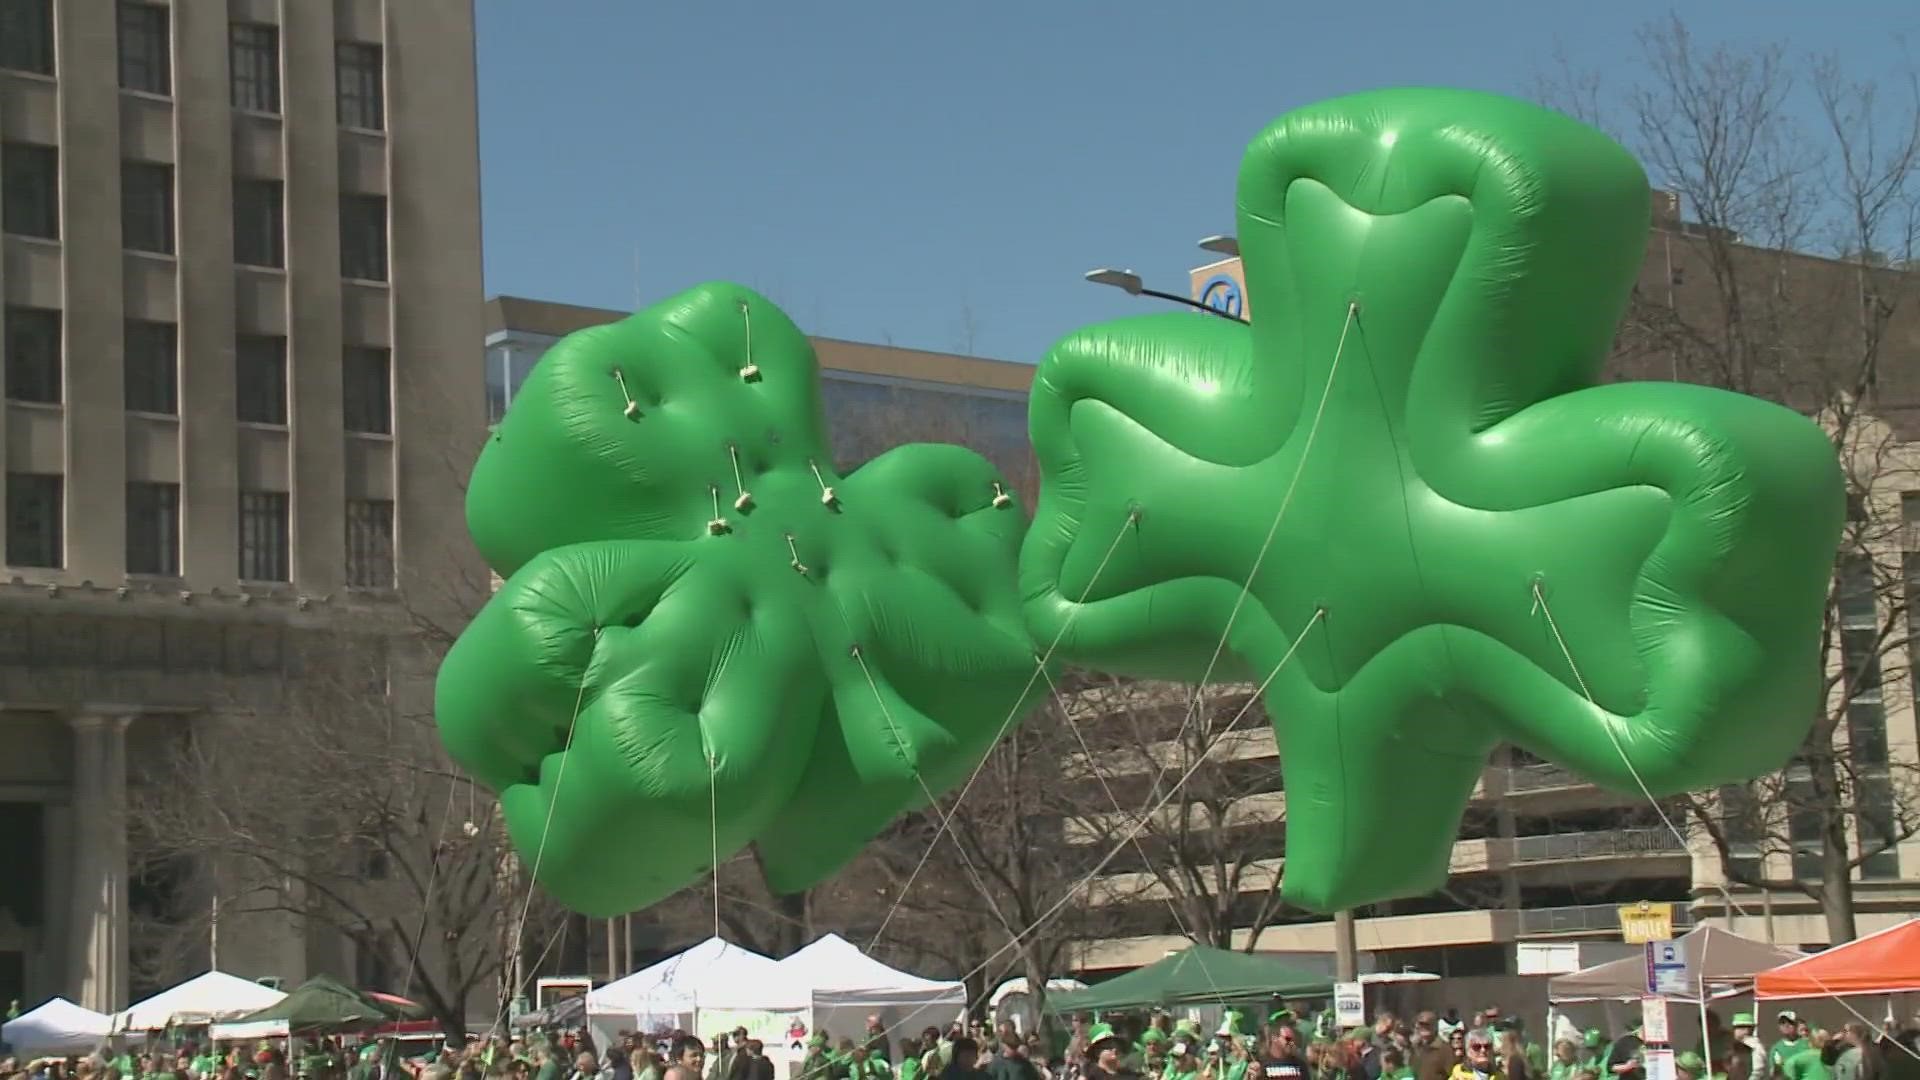 This annual St. Louis event is one of the largest St. Patrick’s parades in the nation. More than 250,000 spectators are expected to line the route on Market Street.